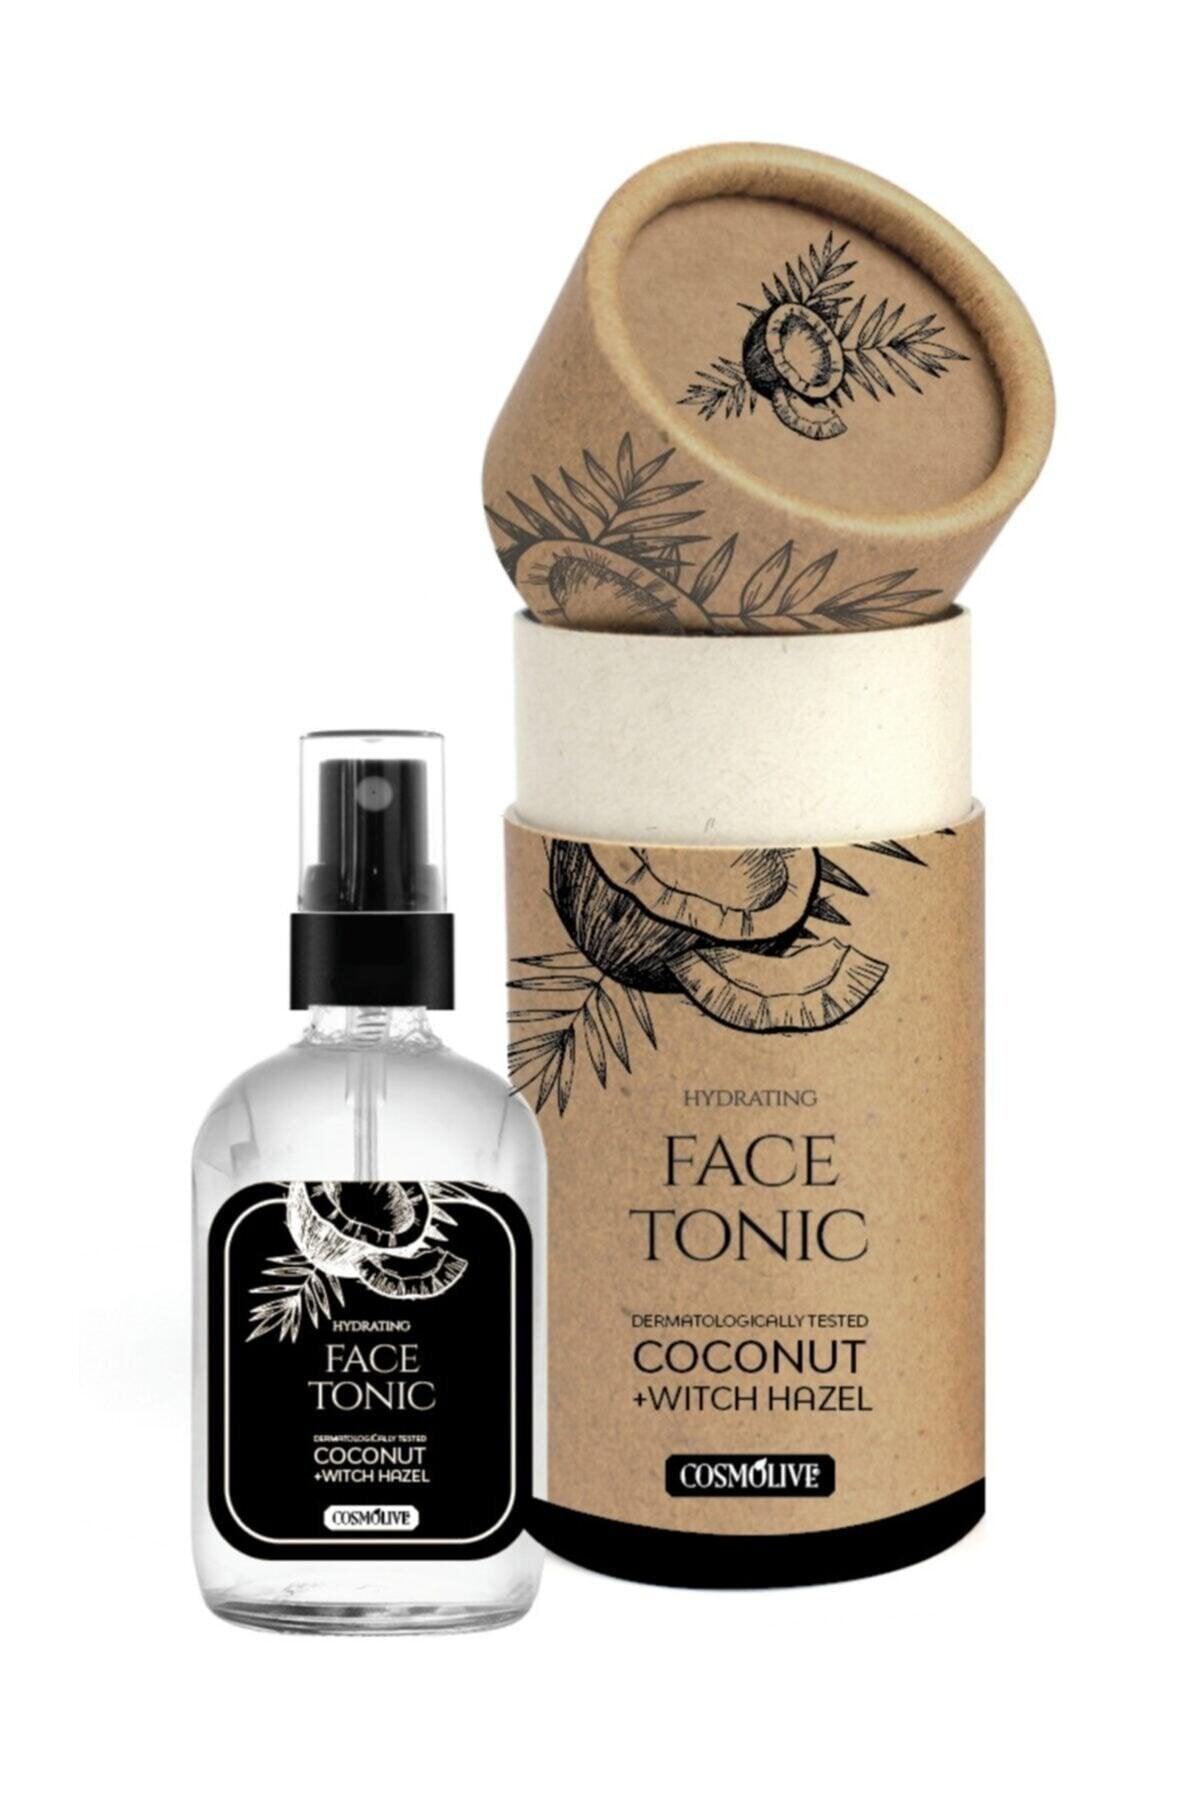 COSMOLIVE FACE TONIC 240 ml - COCONUT (With single kraft box and glass bottle) / Refreshed Skin